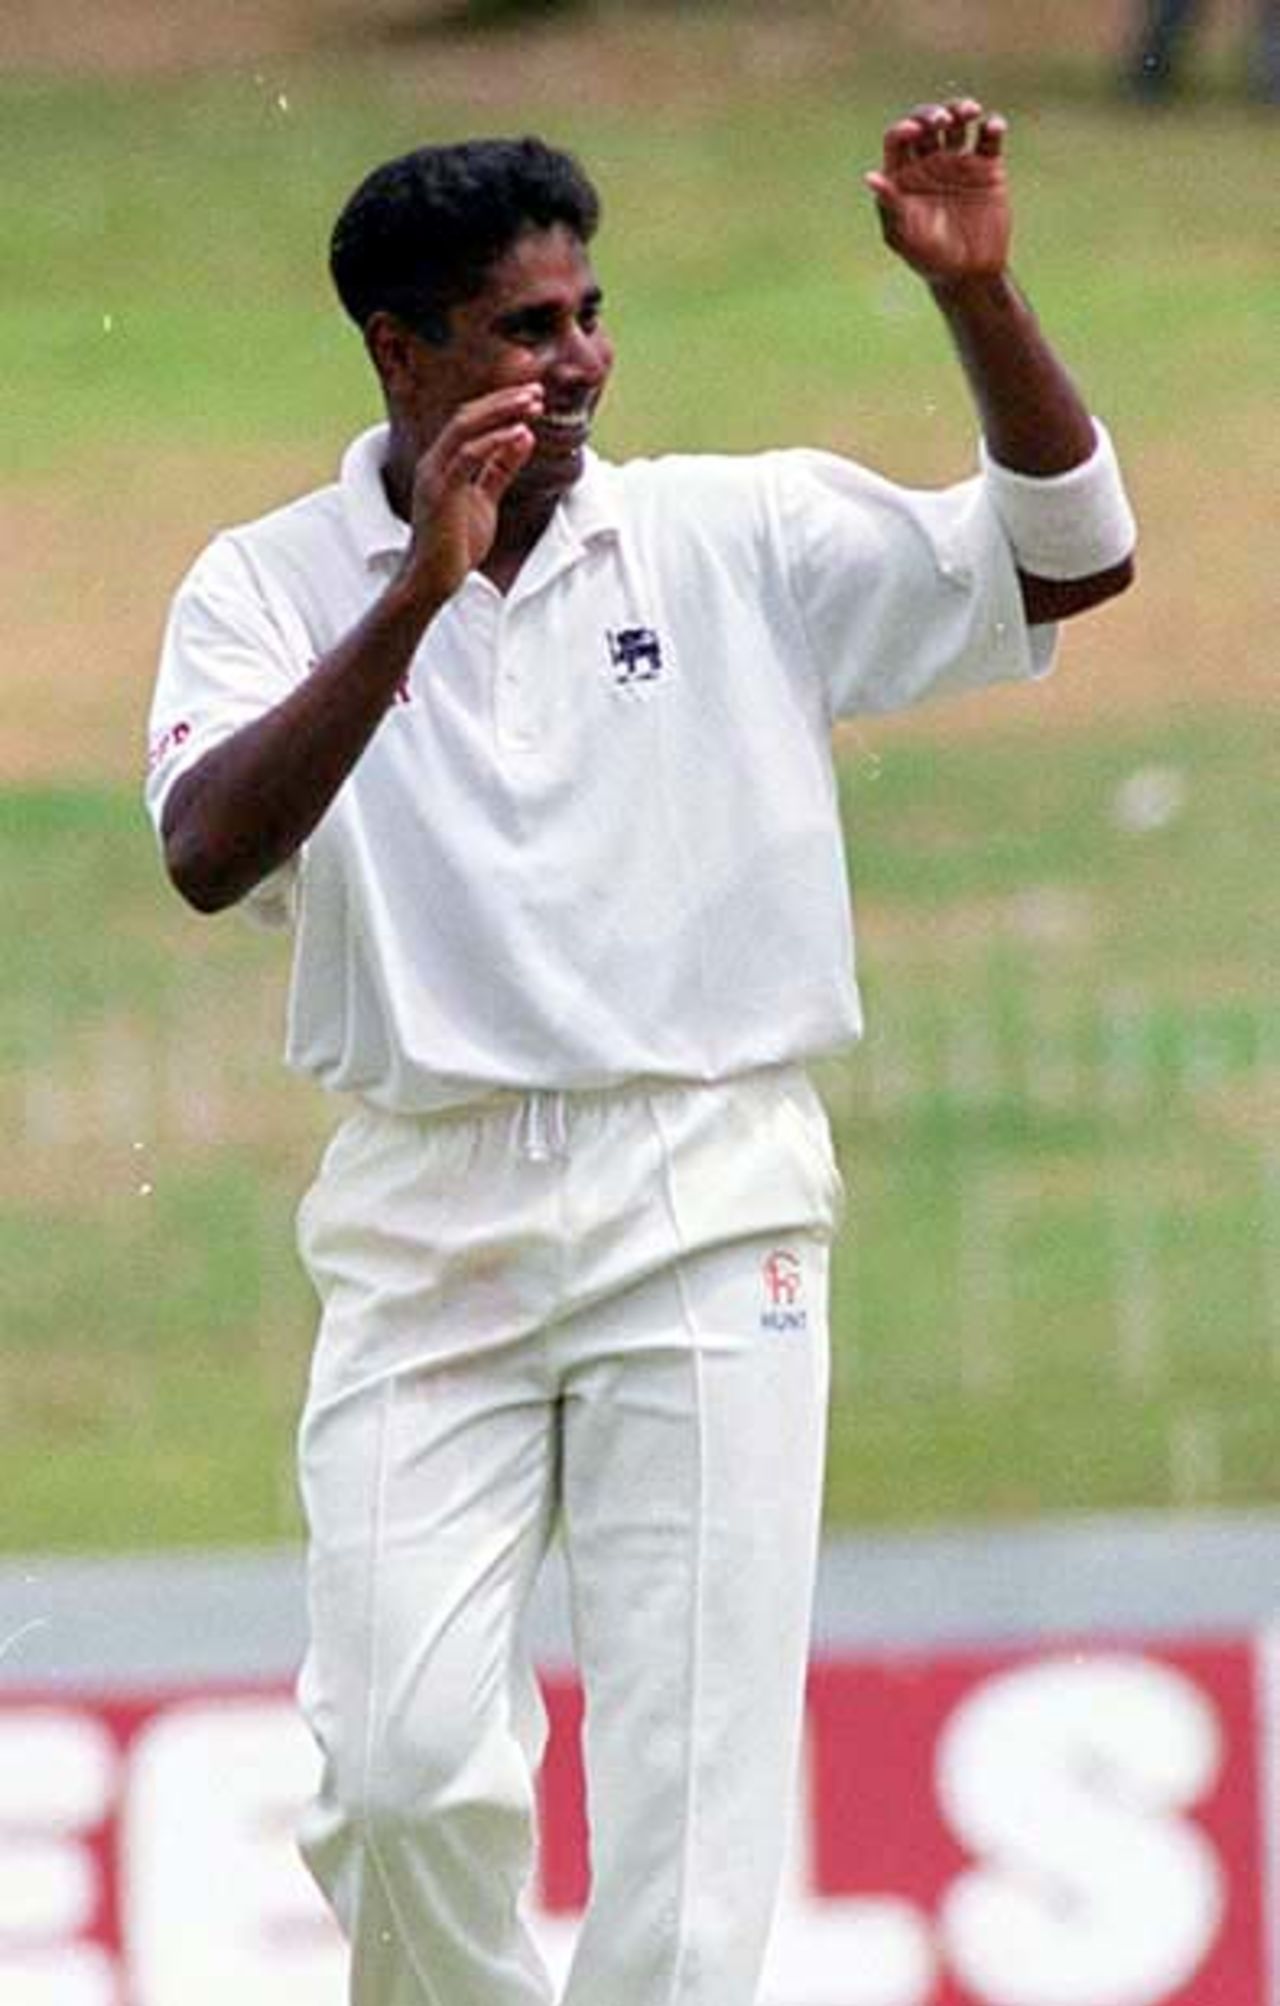 Chaminda Vaas is overjoyed after picking up a South African wicket, South Africa in Sri Lanka, 2000/01, 3rd Test, Sri Lanka v South Africa, Sinhalese Sports Club Ground, Colombo, 06-10 August 2000 (Day 1).